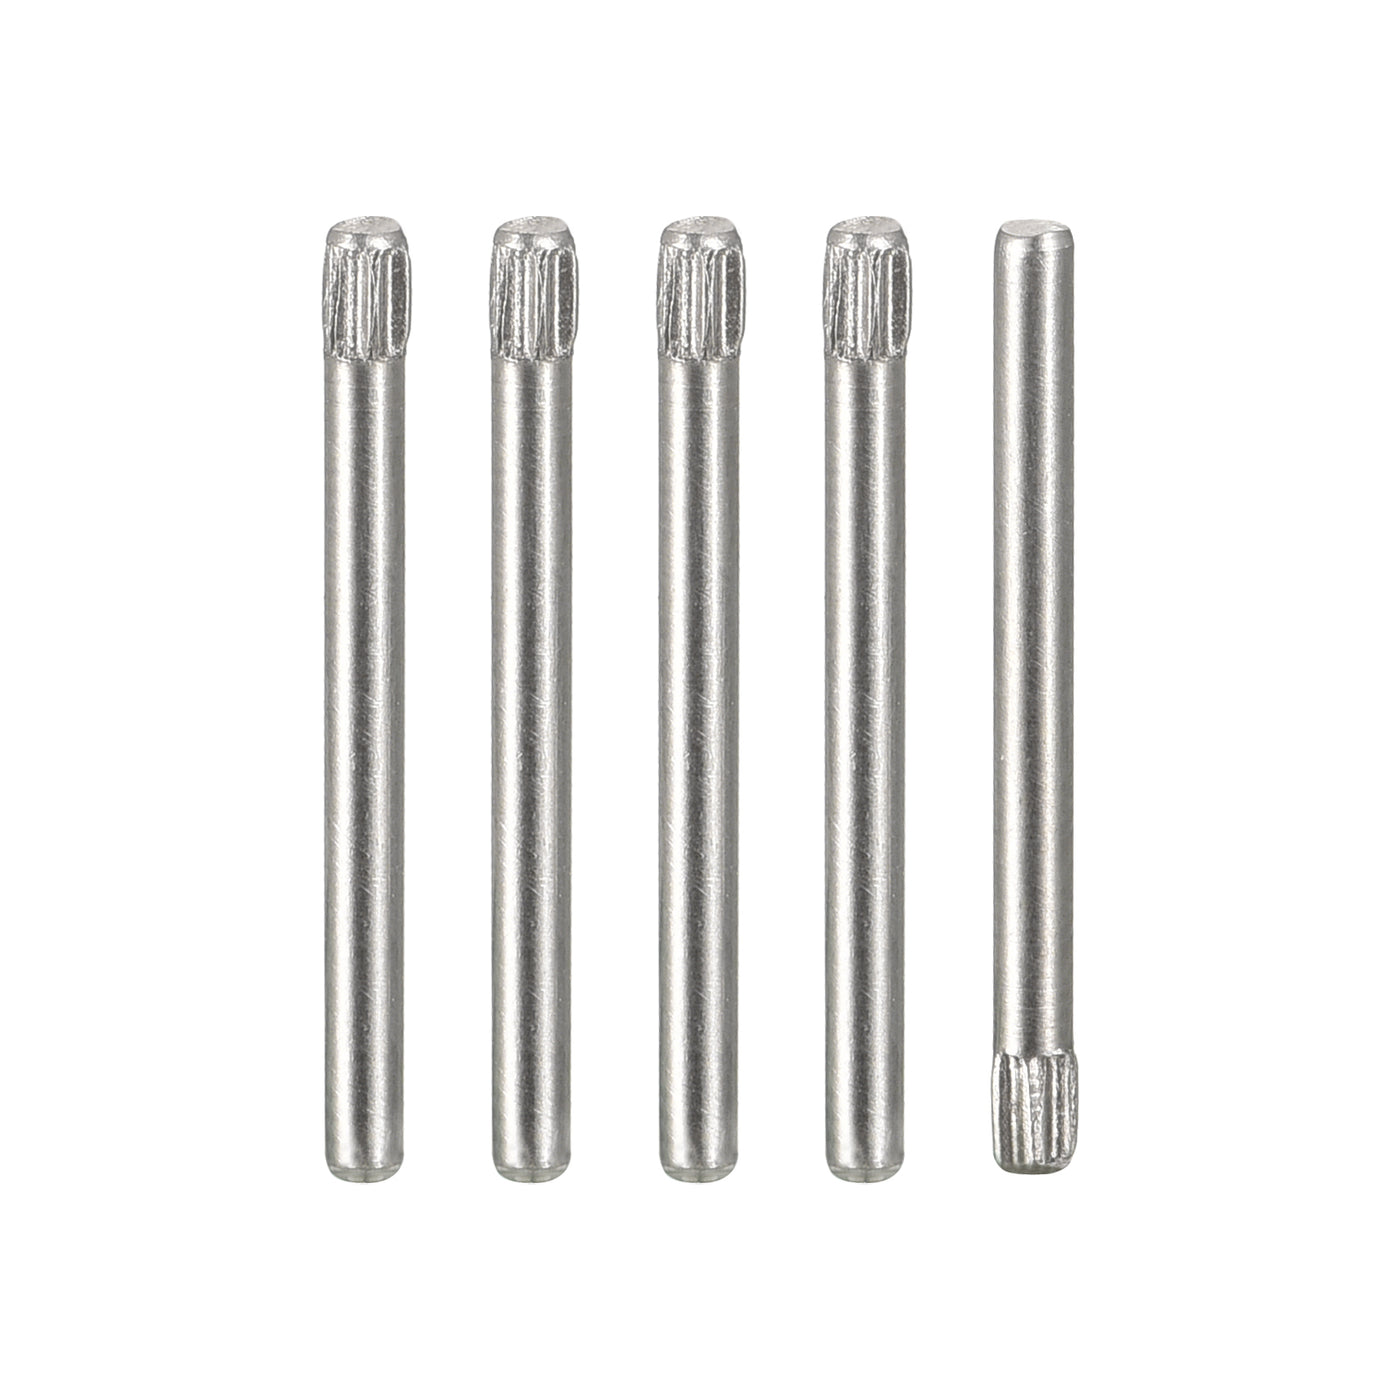 uxcell Uxcell 1.5x20mm 304 Stainless Steel Dowel Pins, 5Pcs Knurled Head Flat End Dowel Pin